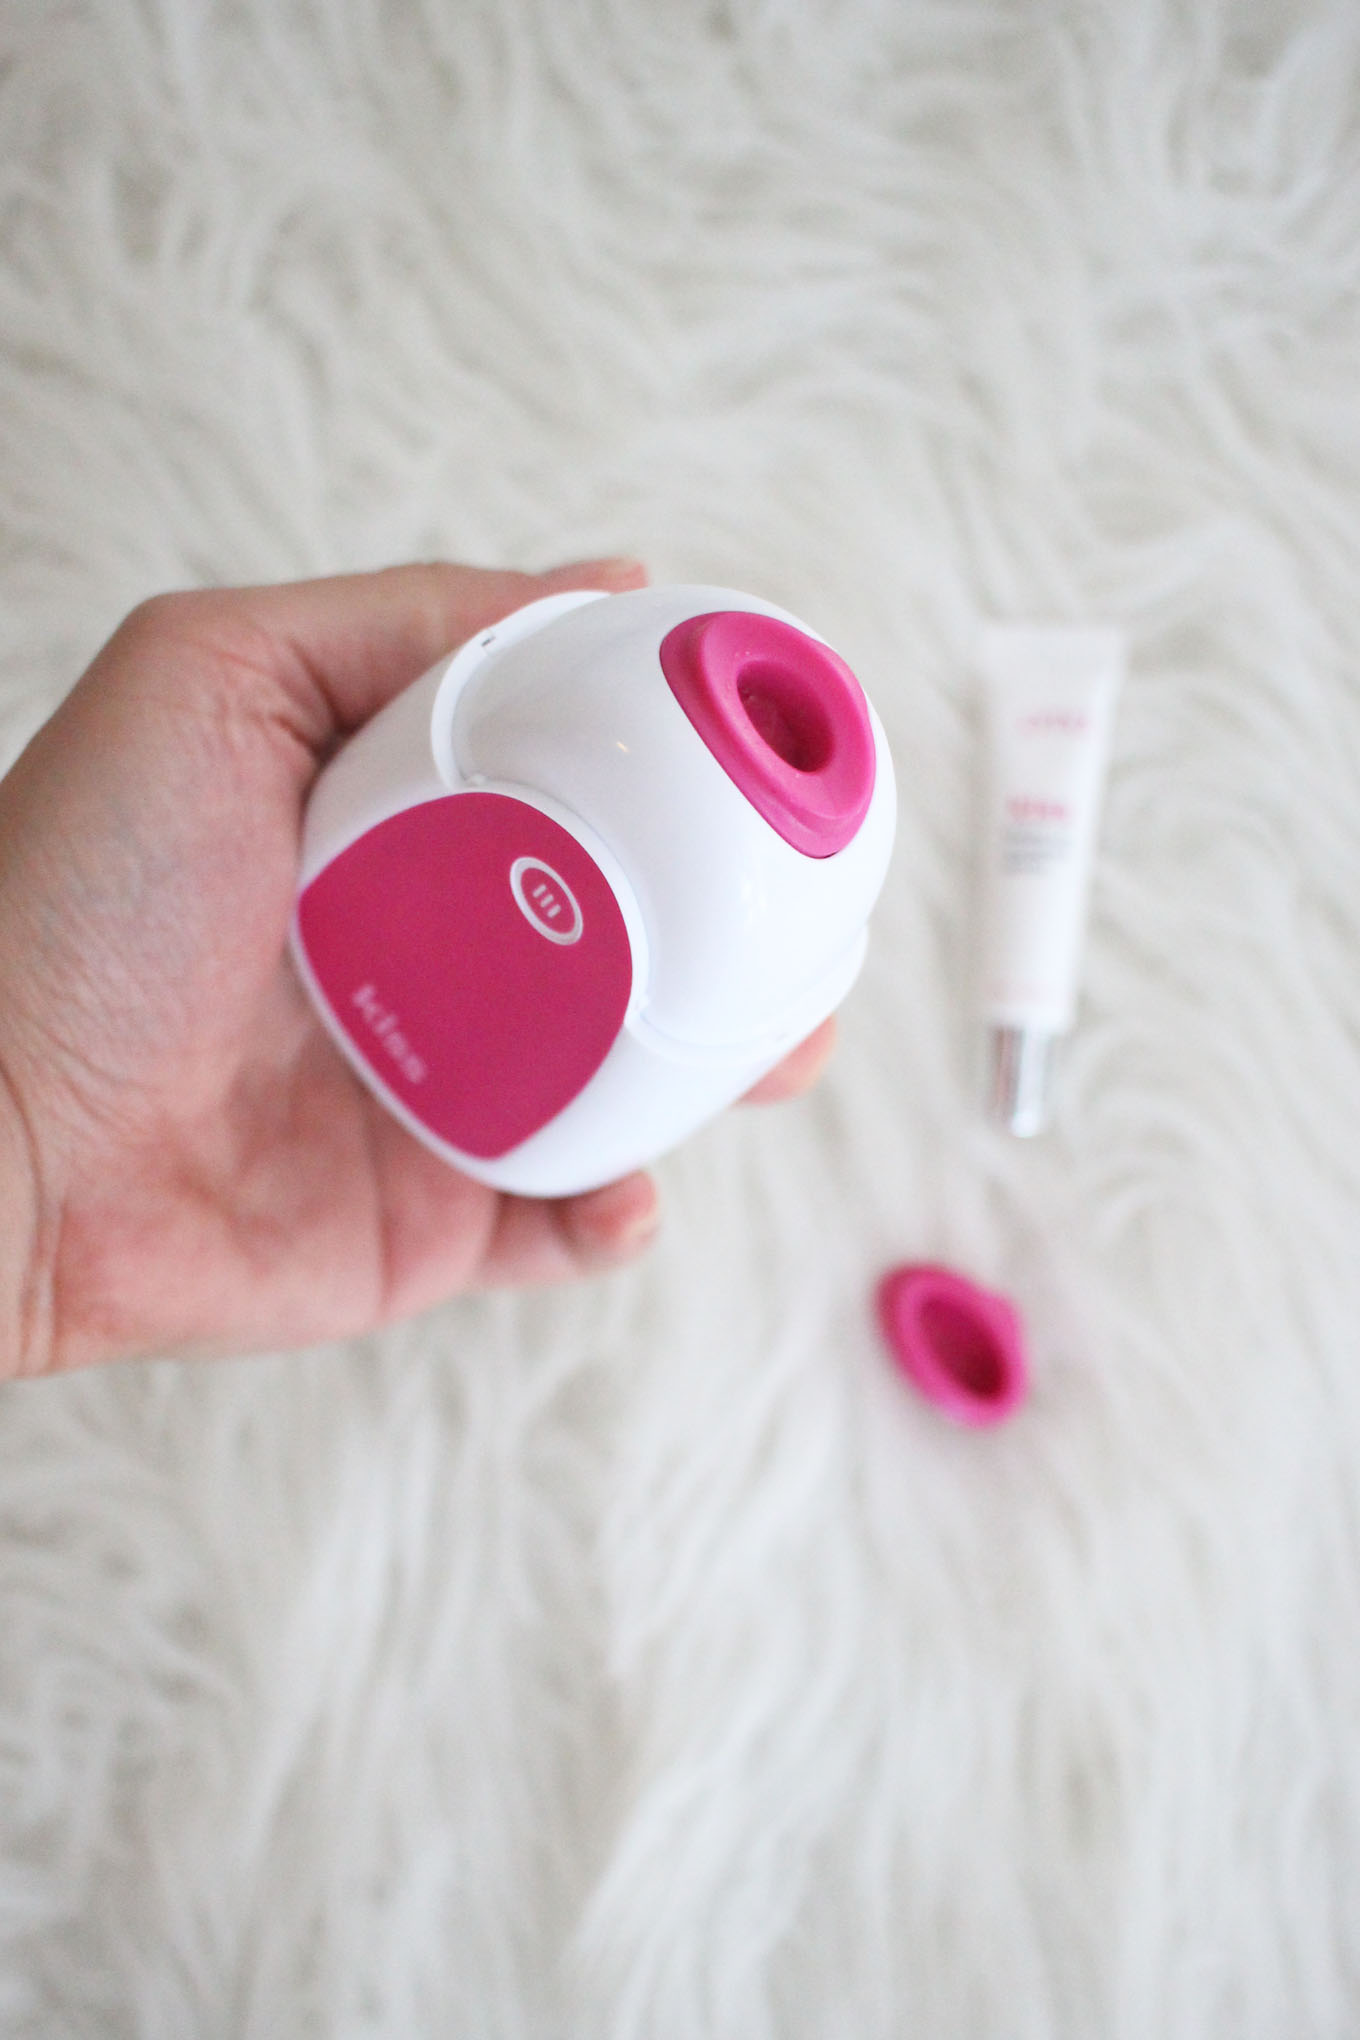 Lifestyle blogger Roxanne of Glass of Glam's review of the PMD Kiss lip plumping device